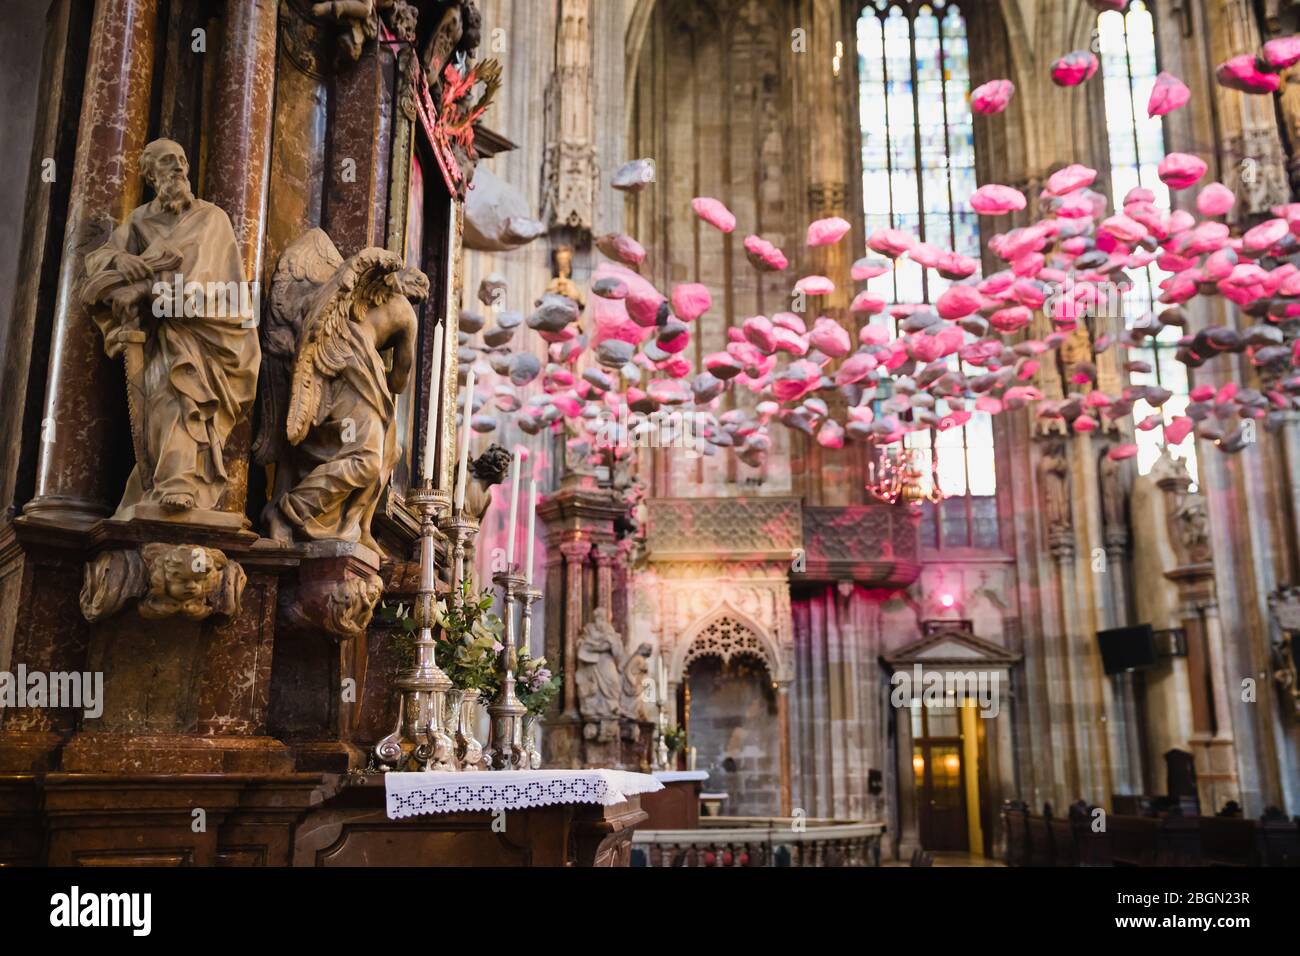 Vienna, Austria - March 23, 2019: Majestic interior of St. Stephen's Cathedral in Vienna, Austria, holy catolic church architecture Stock Photo